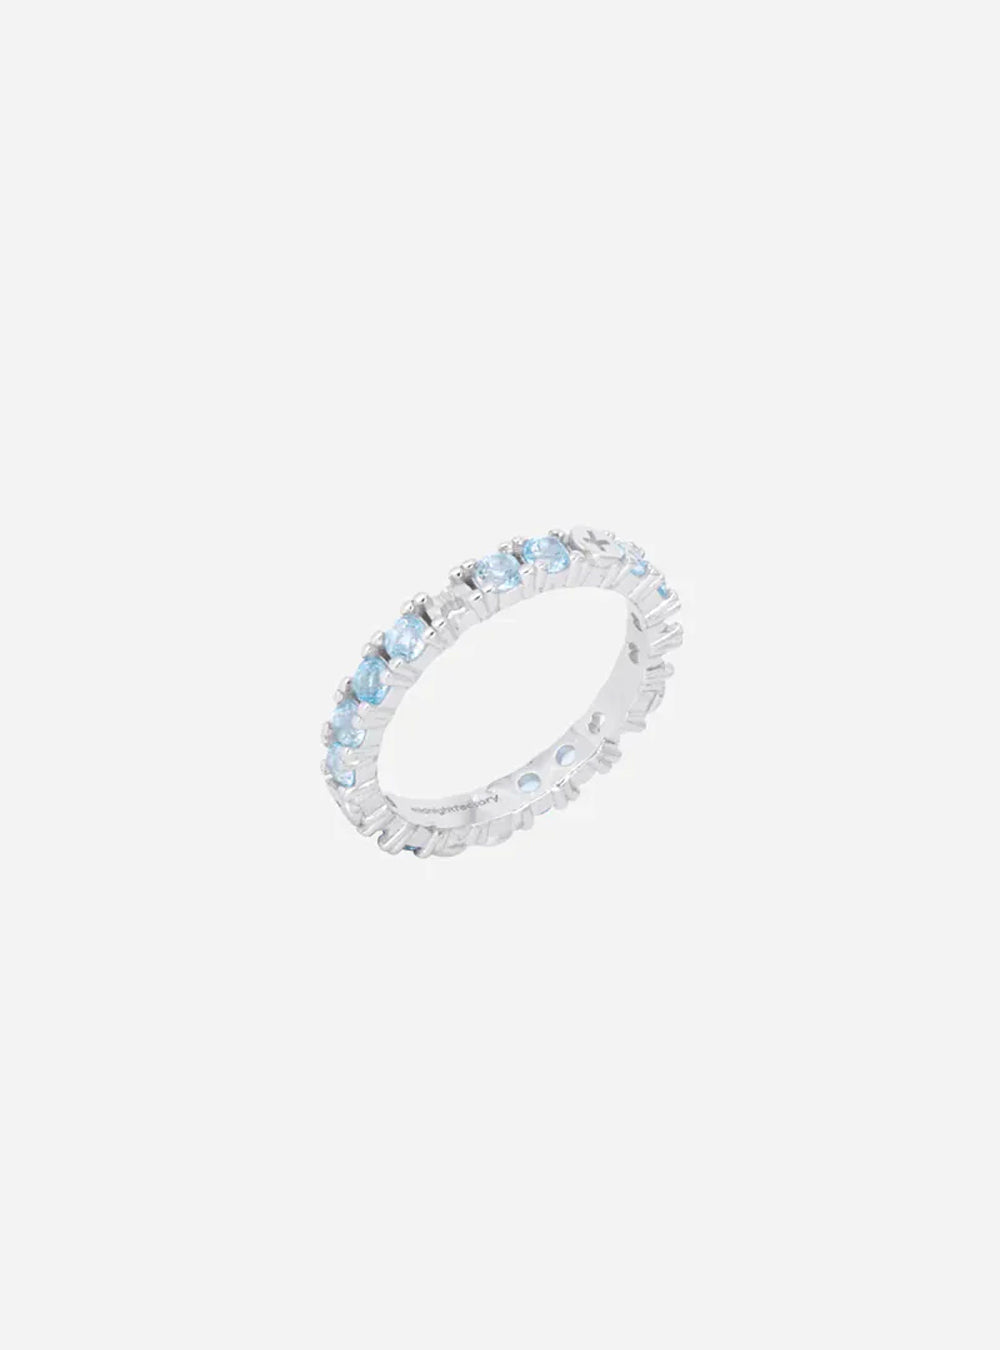 A MIDNIGHTFACTORY white gold ring with blue topaz stones.